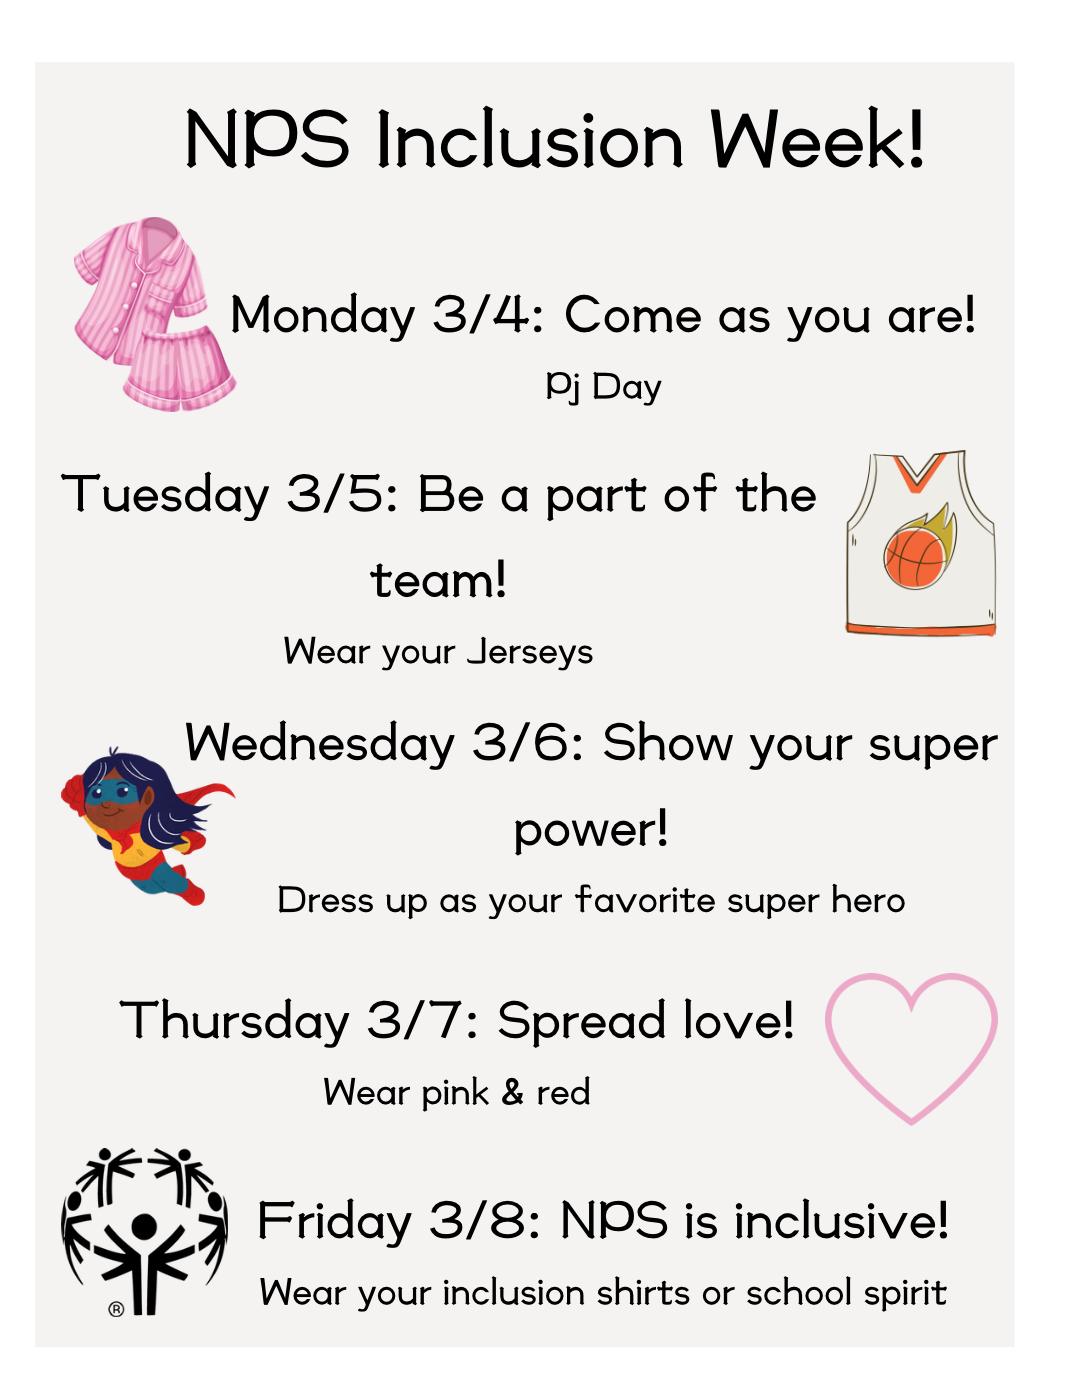 NPS Inclusion Week! Monday 3/4: Come as you are! (PJ Day), Tuesday 3/5: Be a part of the team! (Wear your jersey), Wednesday 3/6: Show your super power! (Dress up as your favorite super hero), Thursday 3/7: Spread love! (Wear pink and red), Friday 3/8: NPS is inclusive! (wear your inclusion shirts or school spirit)